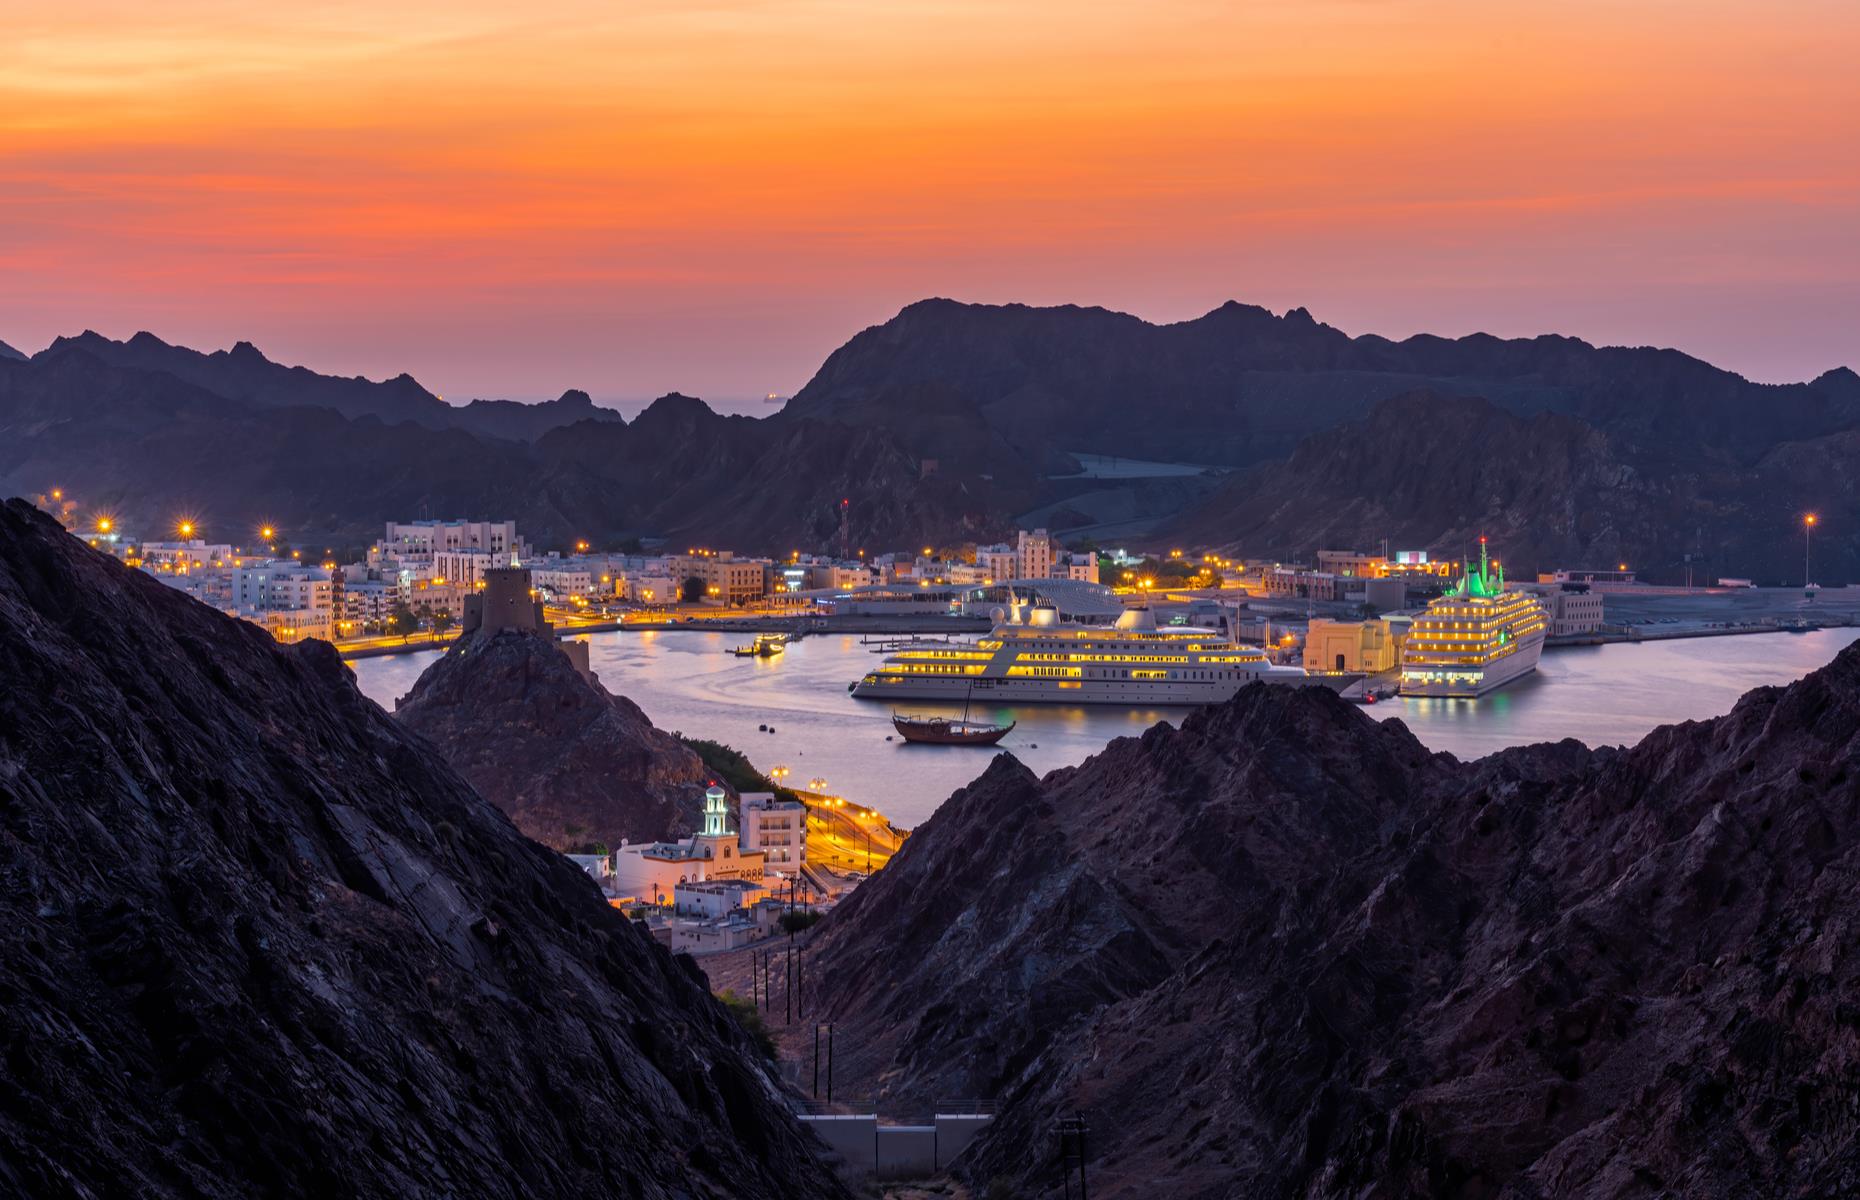 <p>Surrounded by jagged mountains, Muttrah Corniche is an attractive port on the western side of Muscat, the capital of Oman. The pretty waterfront is the city's old commercial centre and still the place to be today with a daily fish market, a bustling souk filled with vendors and more.</p>